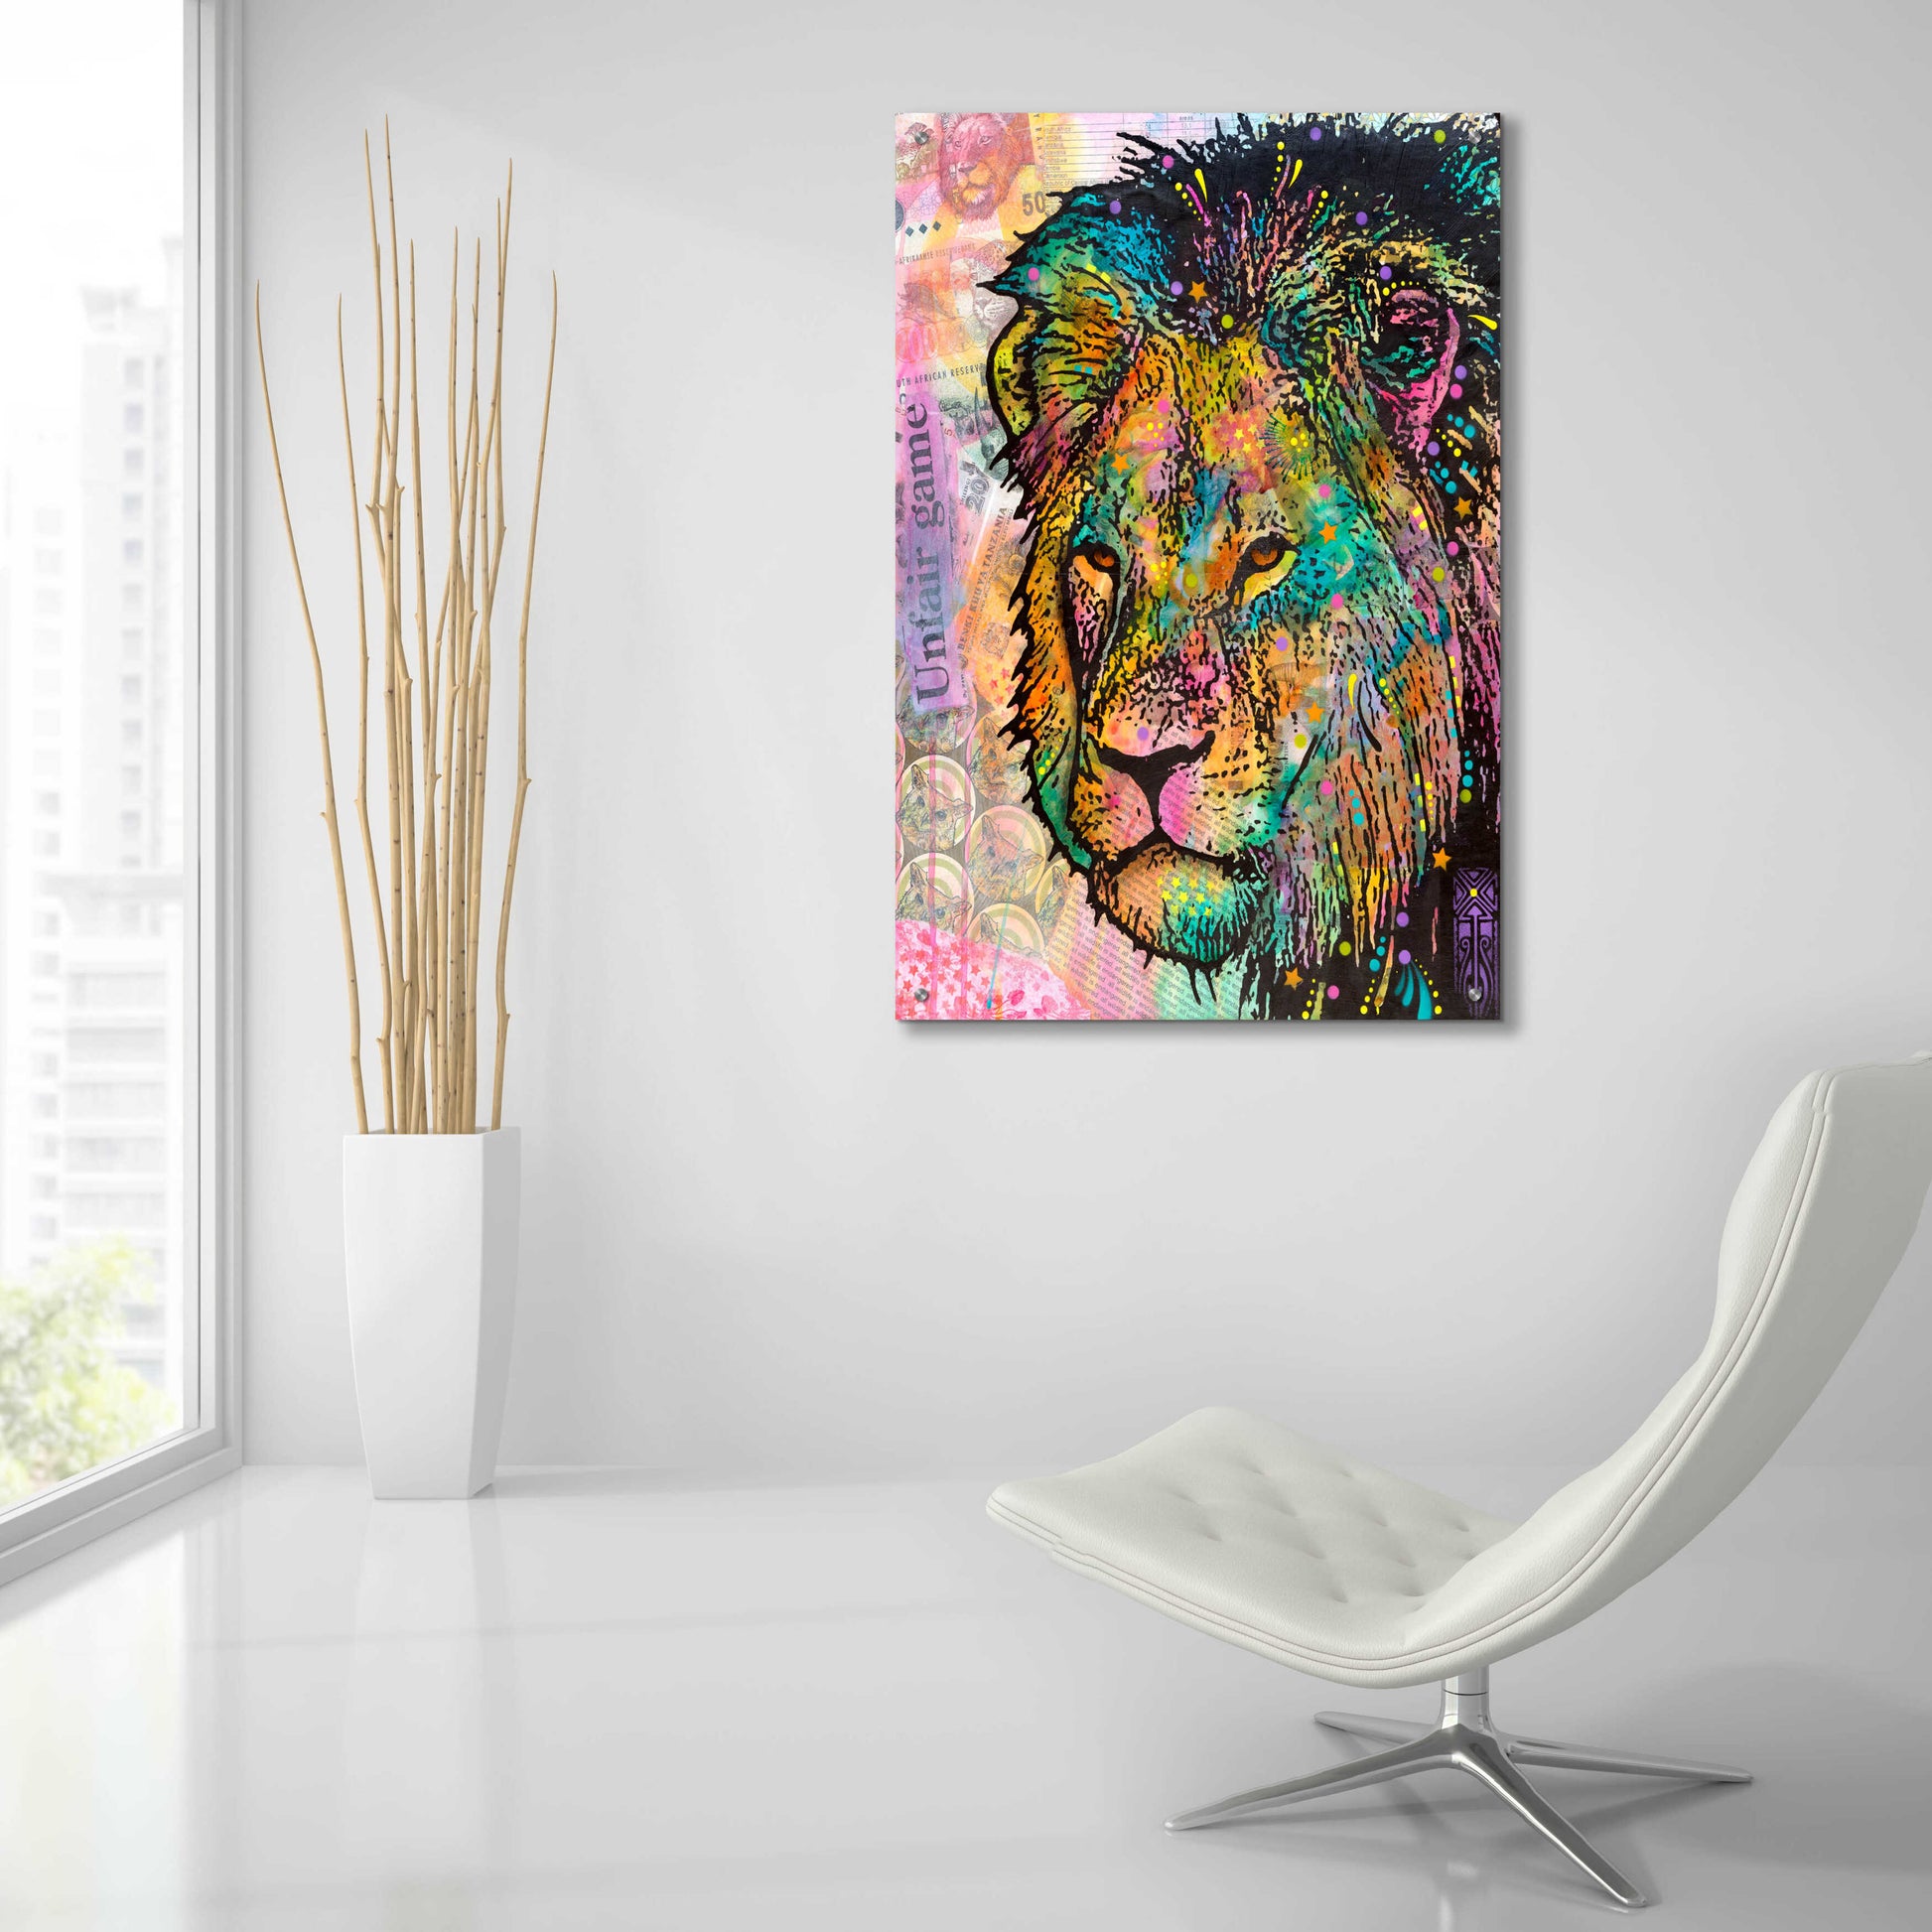 Epic Art 'The Poached' by Dean Russo, Acrylic Glass Wall Art,24x36